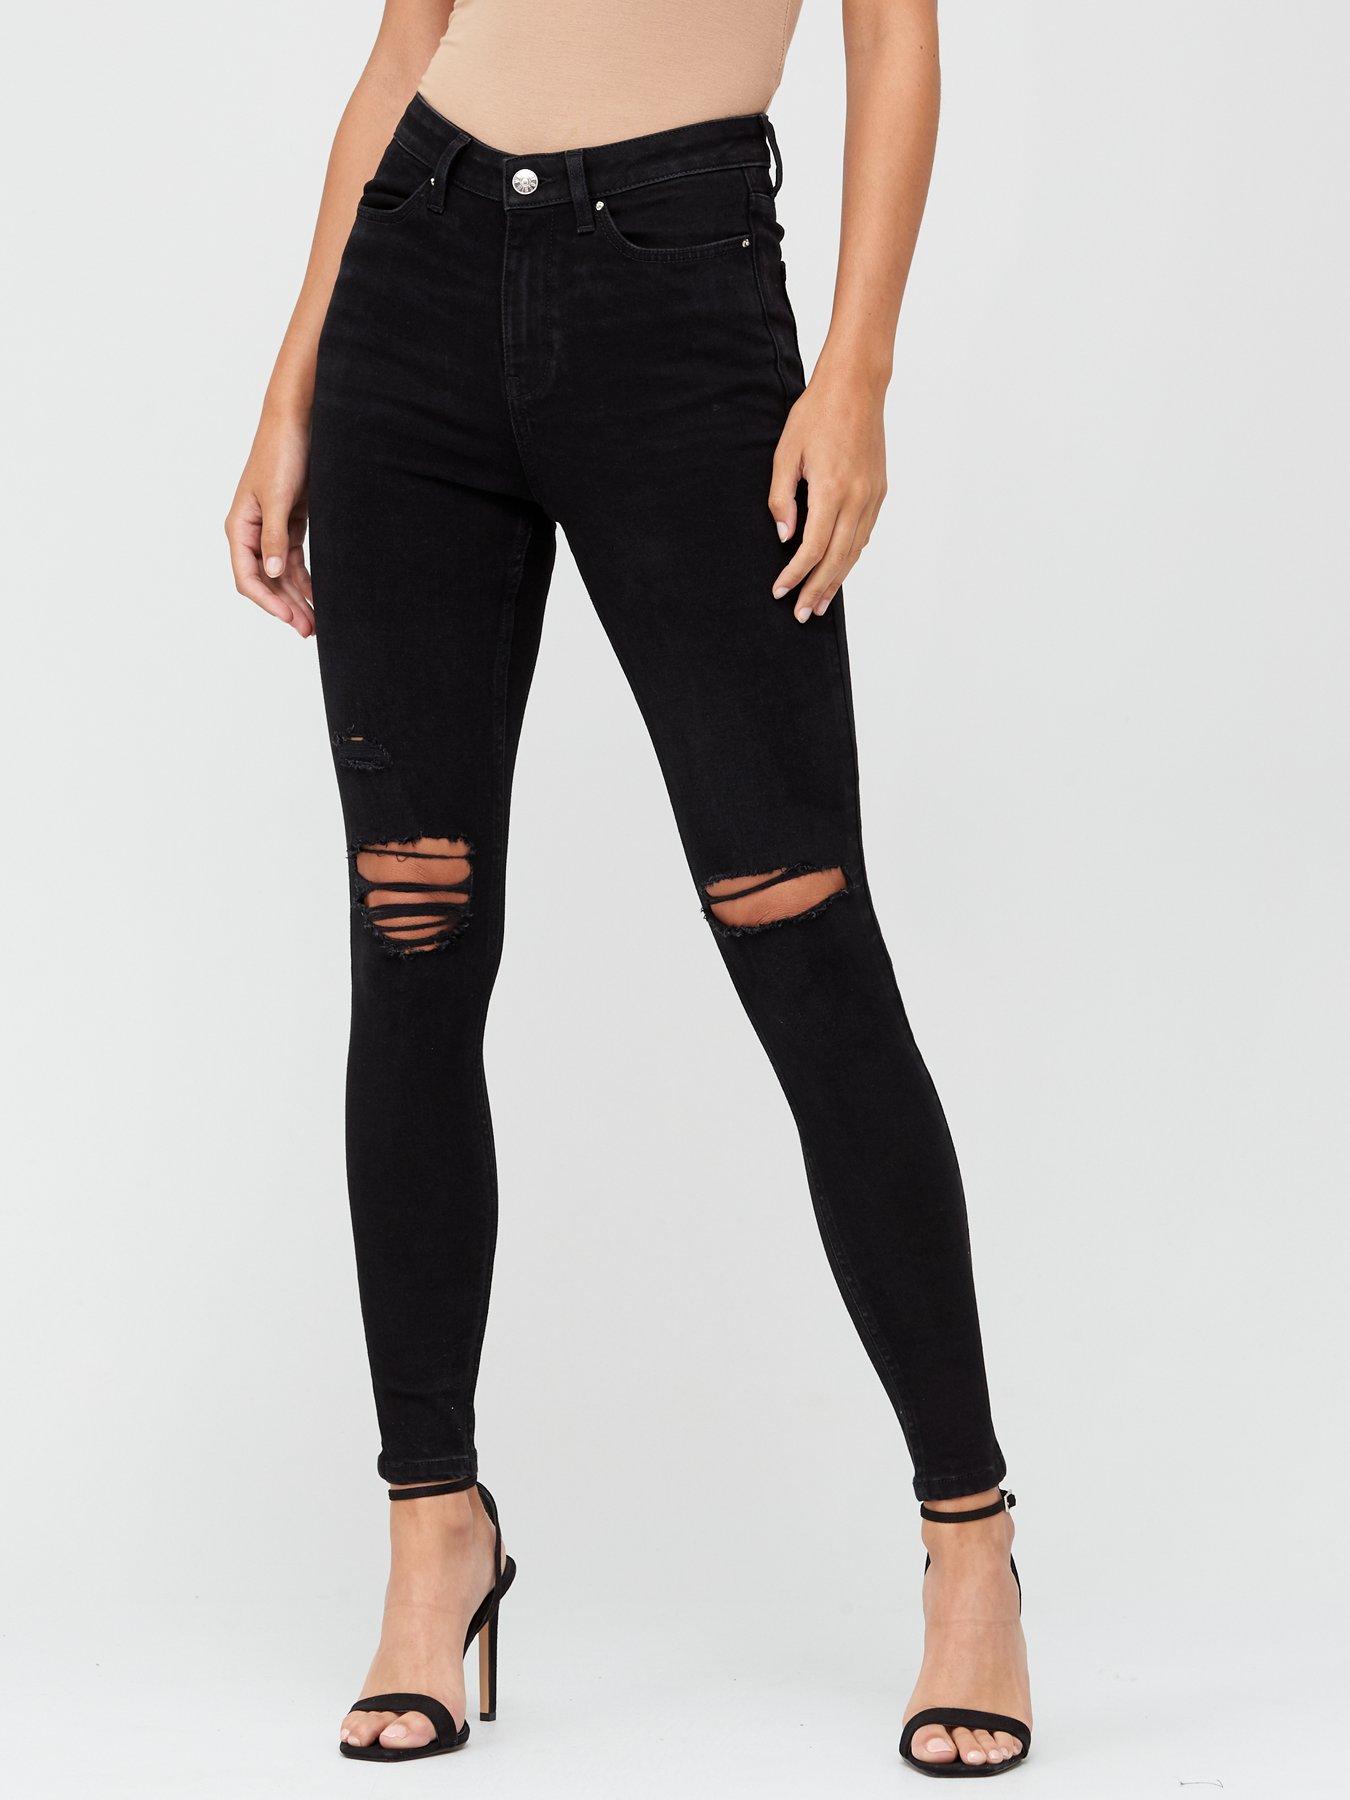 black ripped jeans size 6